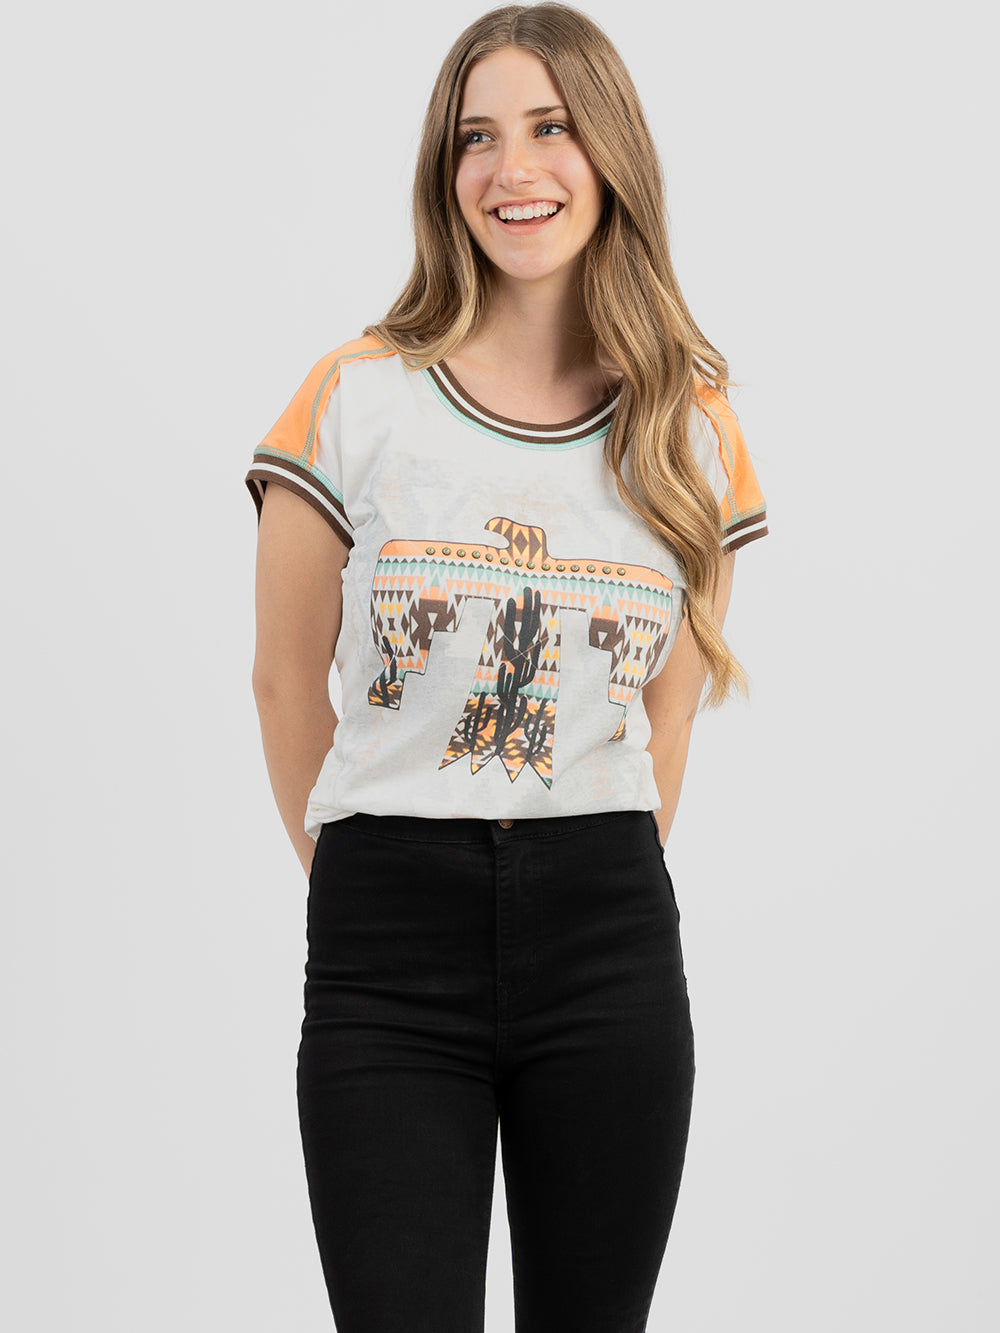 Women's Mineral Wash Contrast Stitched Studded Eagle and Desert Graphic Short Sleeve Tee - Cowgirl Wear